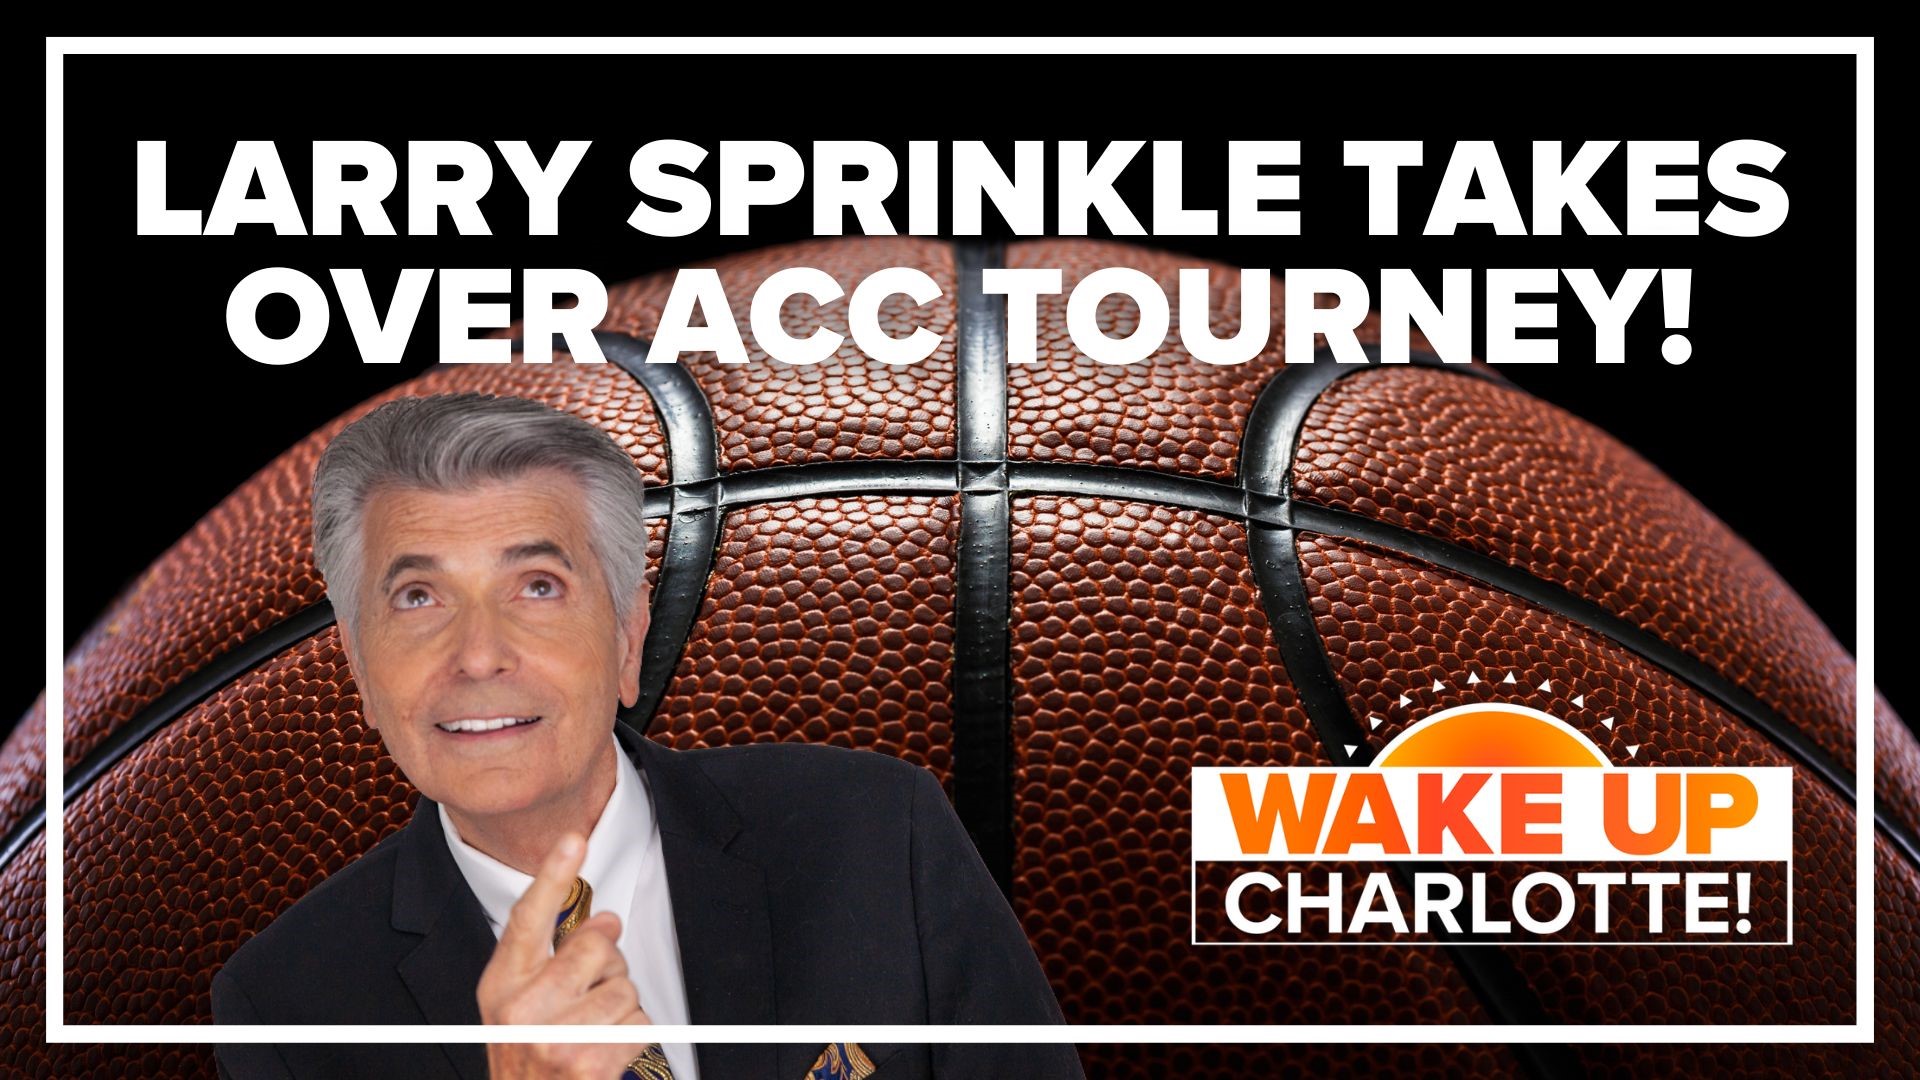 Wake Up Charlotte's Larry Sprinkle was a big topic of conversation during the ACC Tournament.